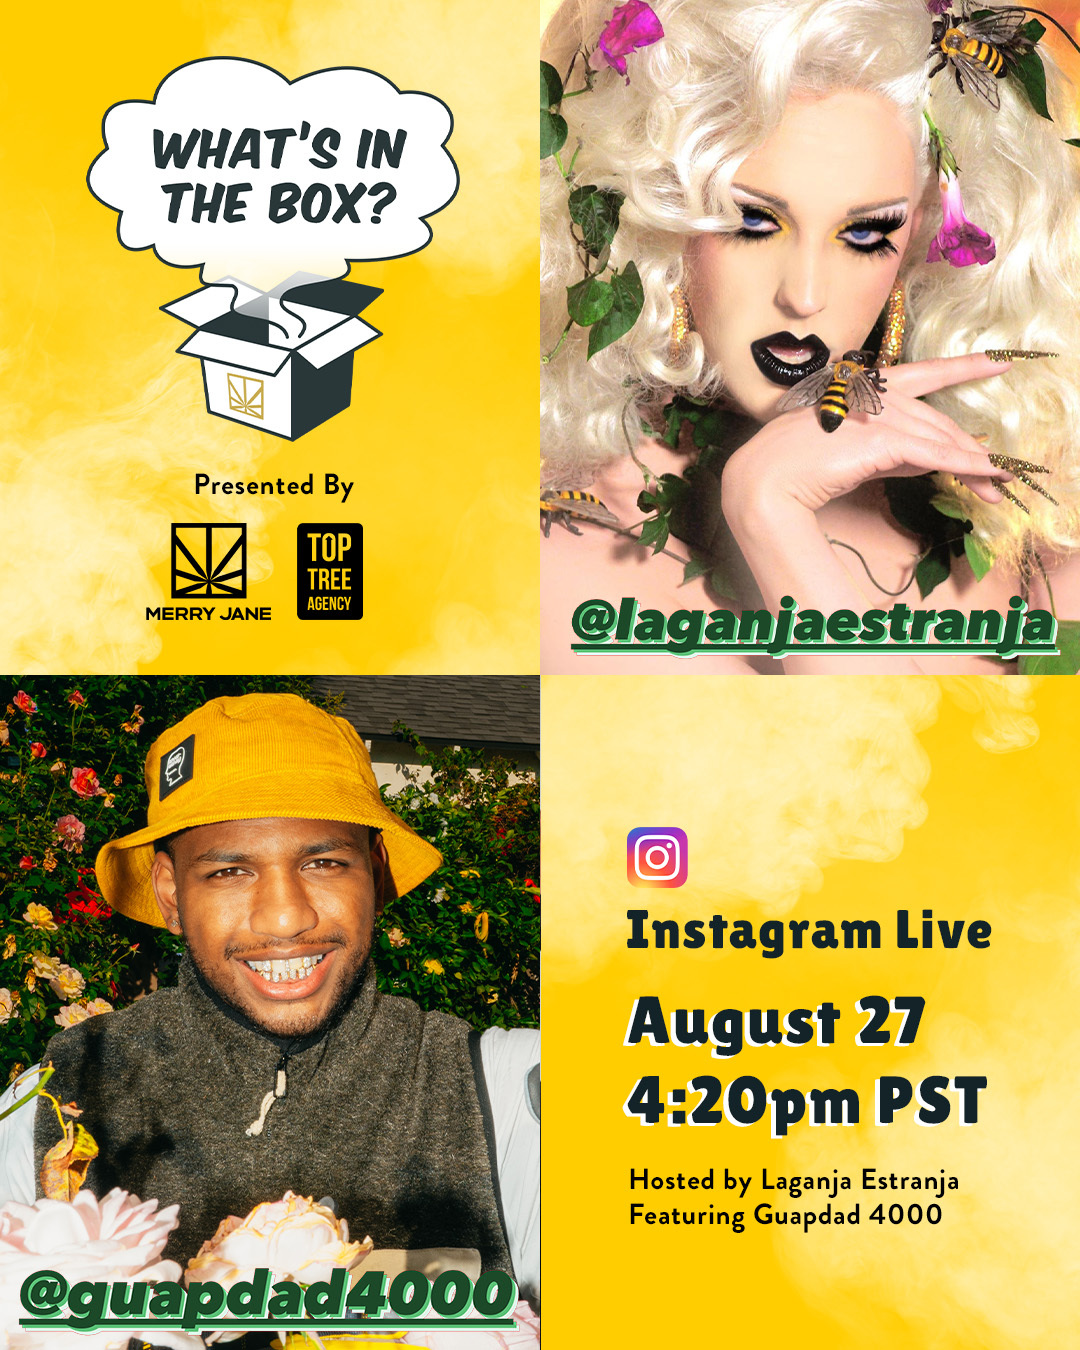 MERRY JANE’s New IG Live Series “What’s in the Box” Is the Internet’s Hottest Smoke Sesh